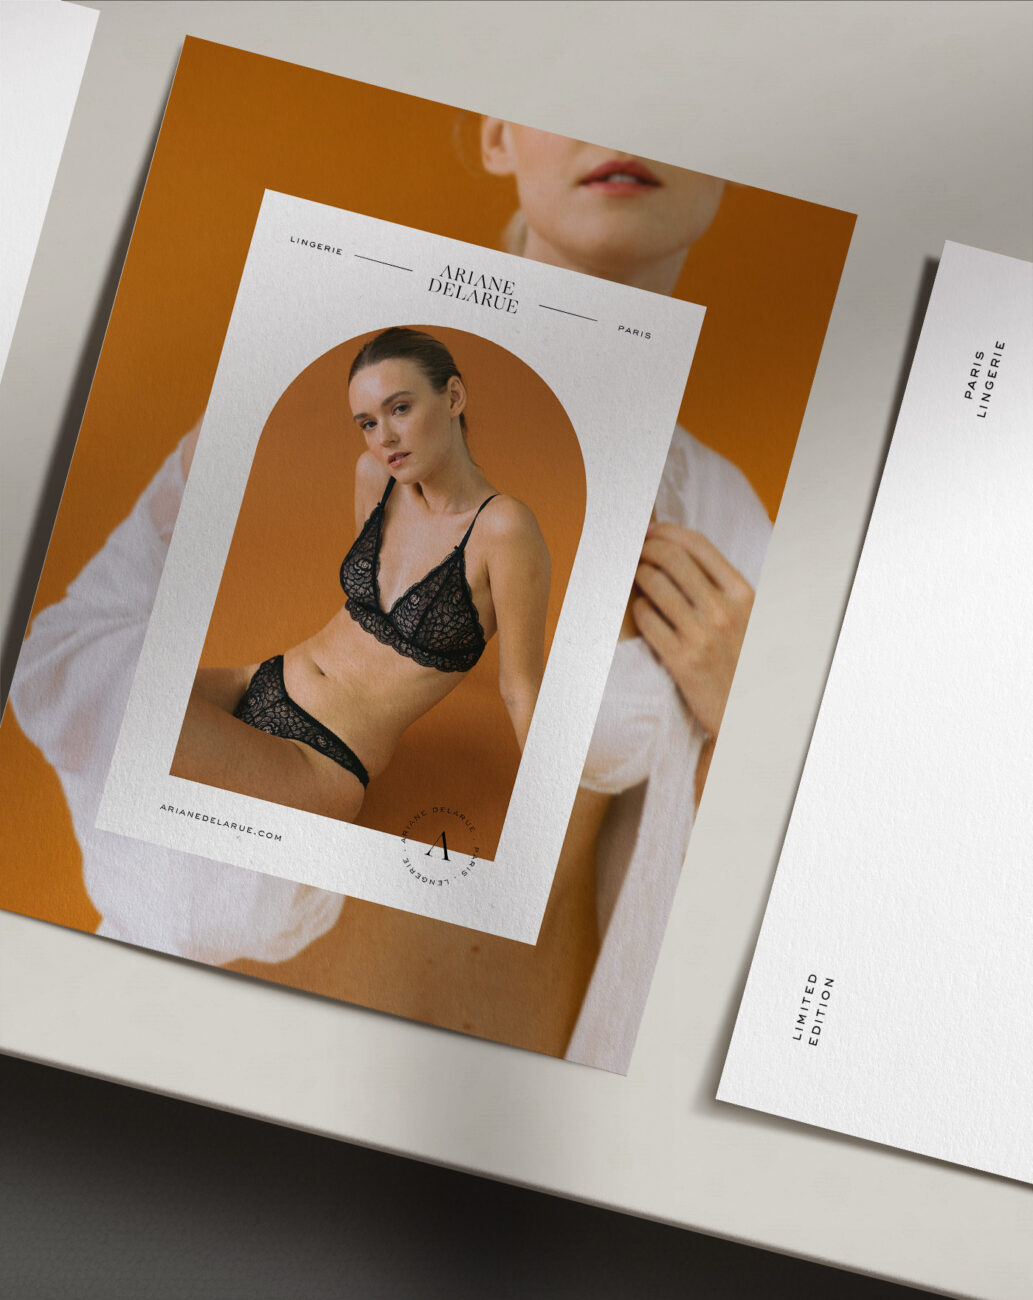 Luxury postcard and branding for a lingerie brand Ariane Delarue